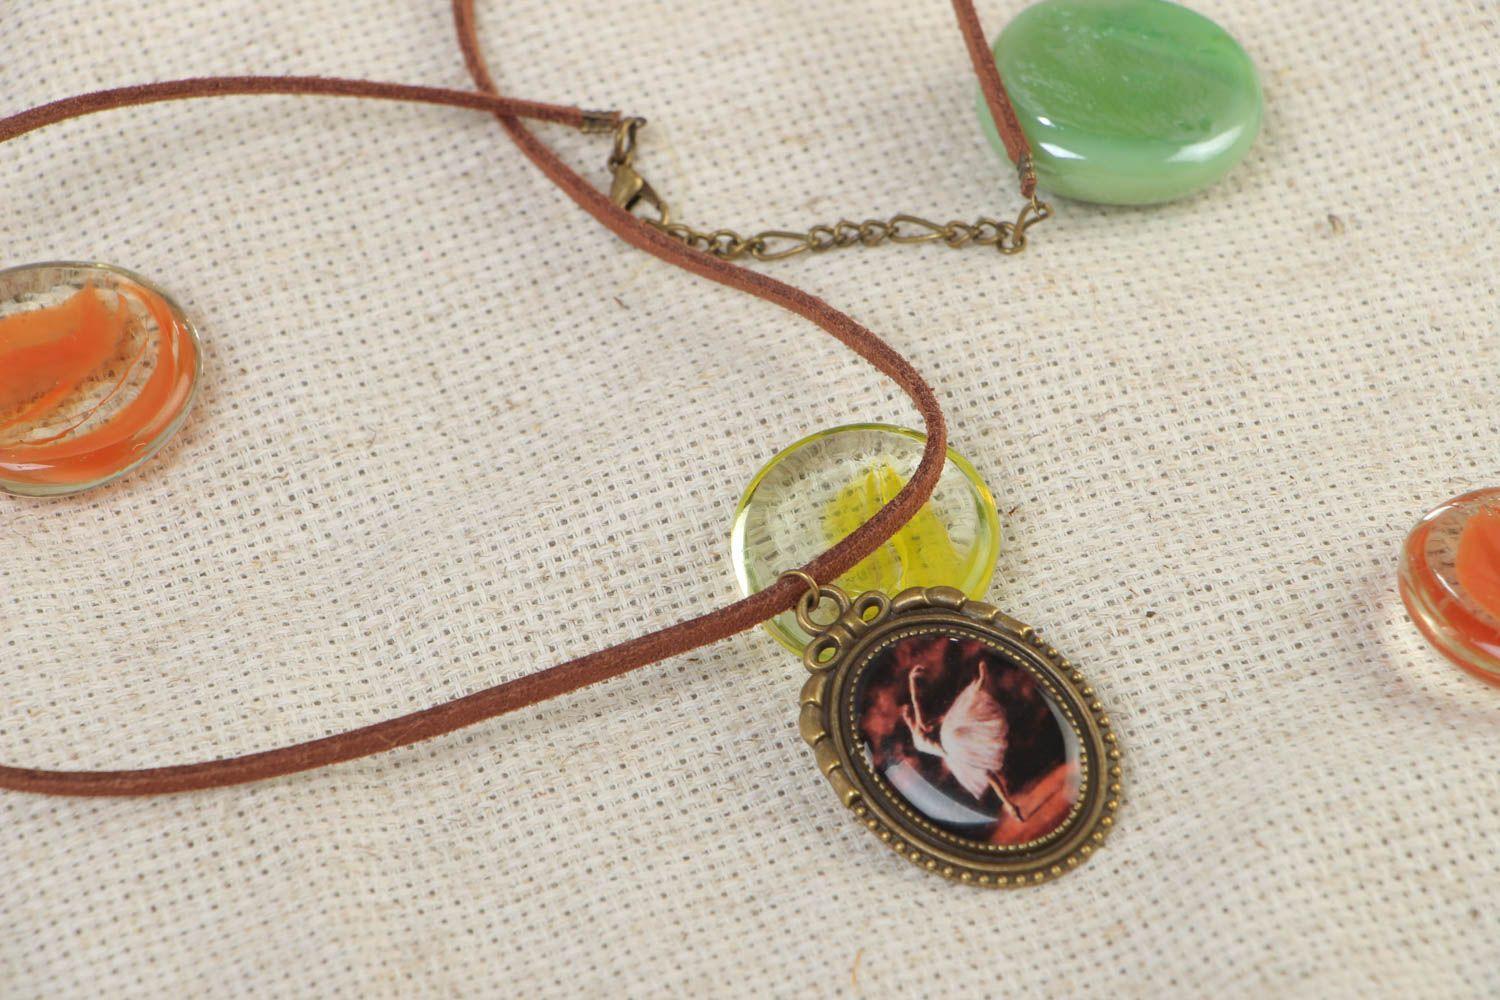 Handmade oval metal pendant necklace coated with glass glaze in vintage style photo 1